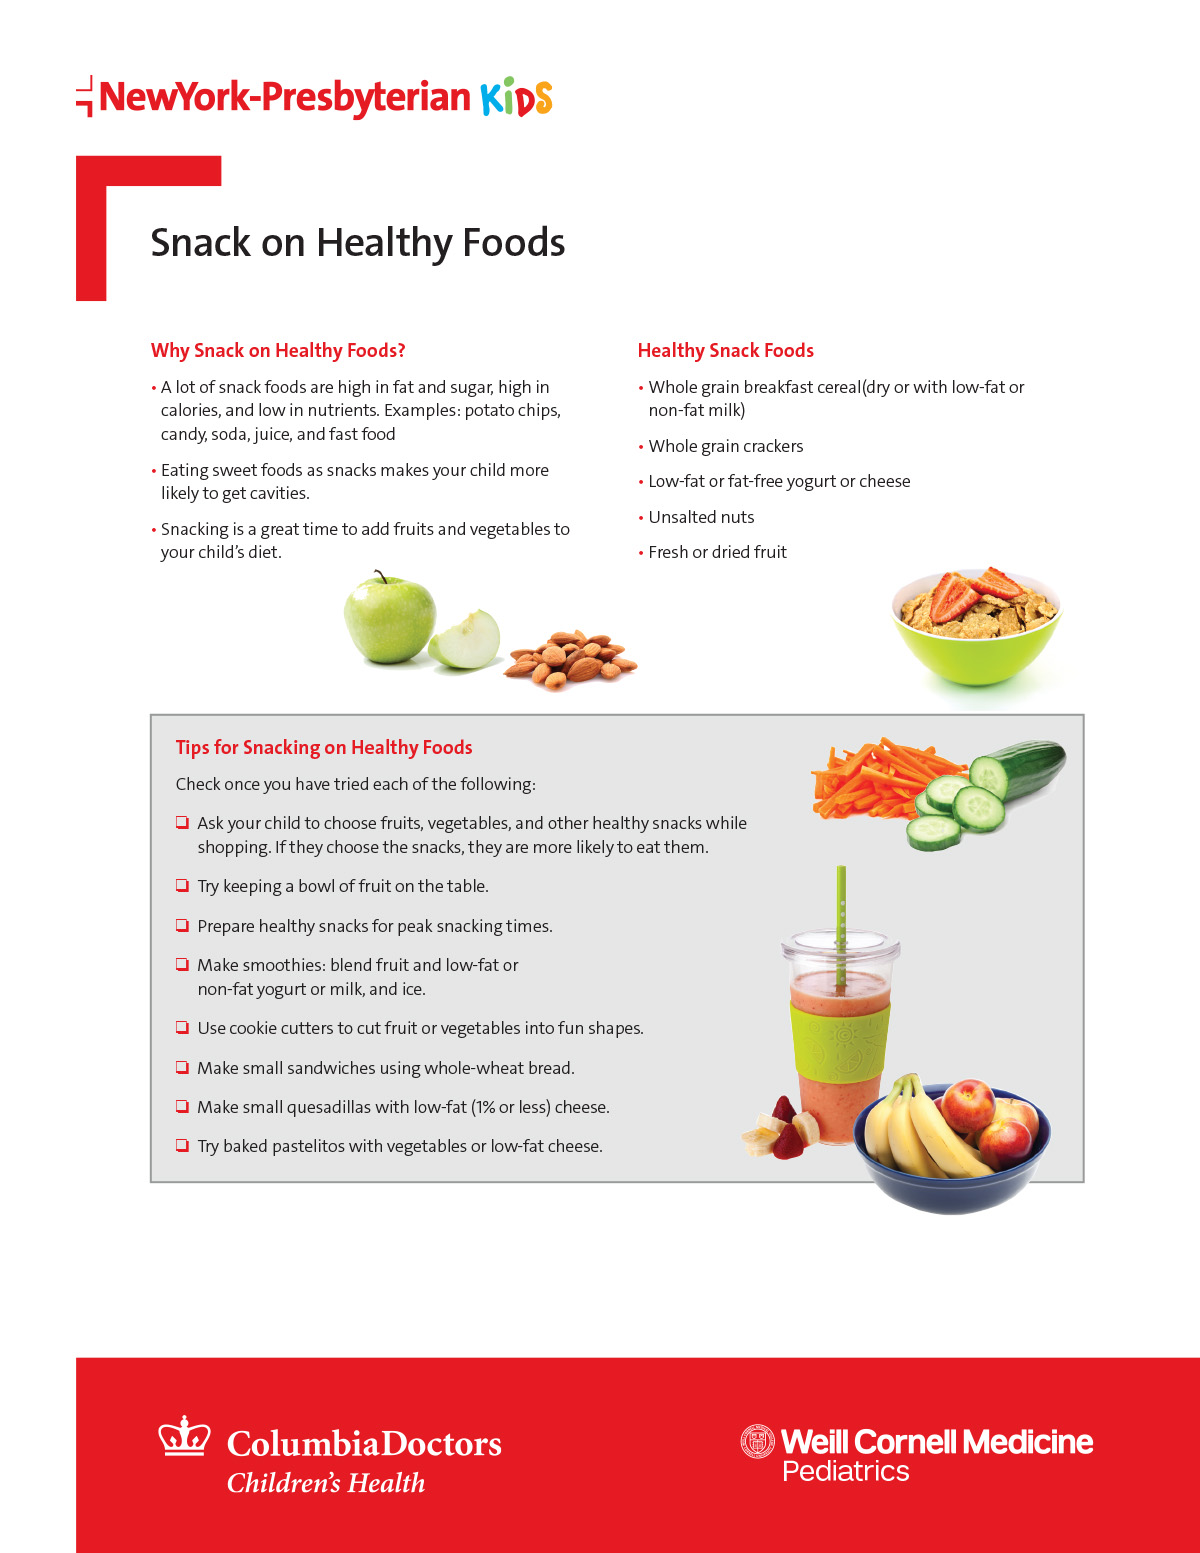 Snack on Healthy Foods